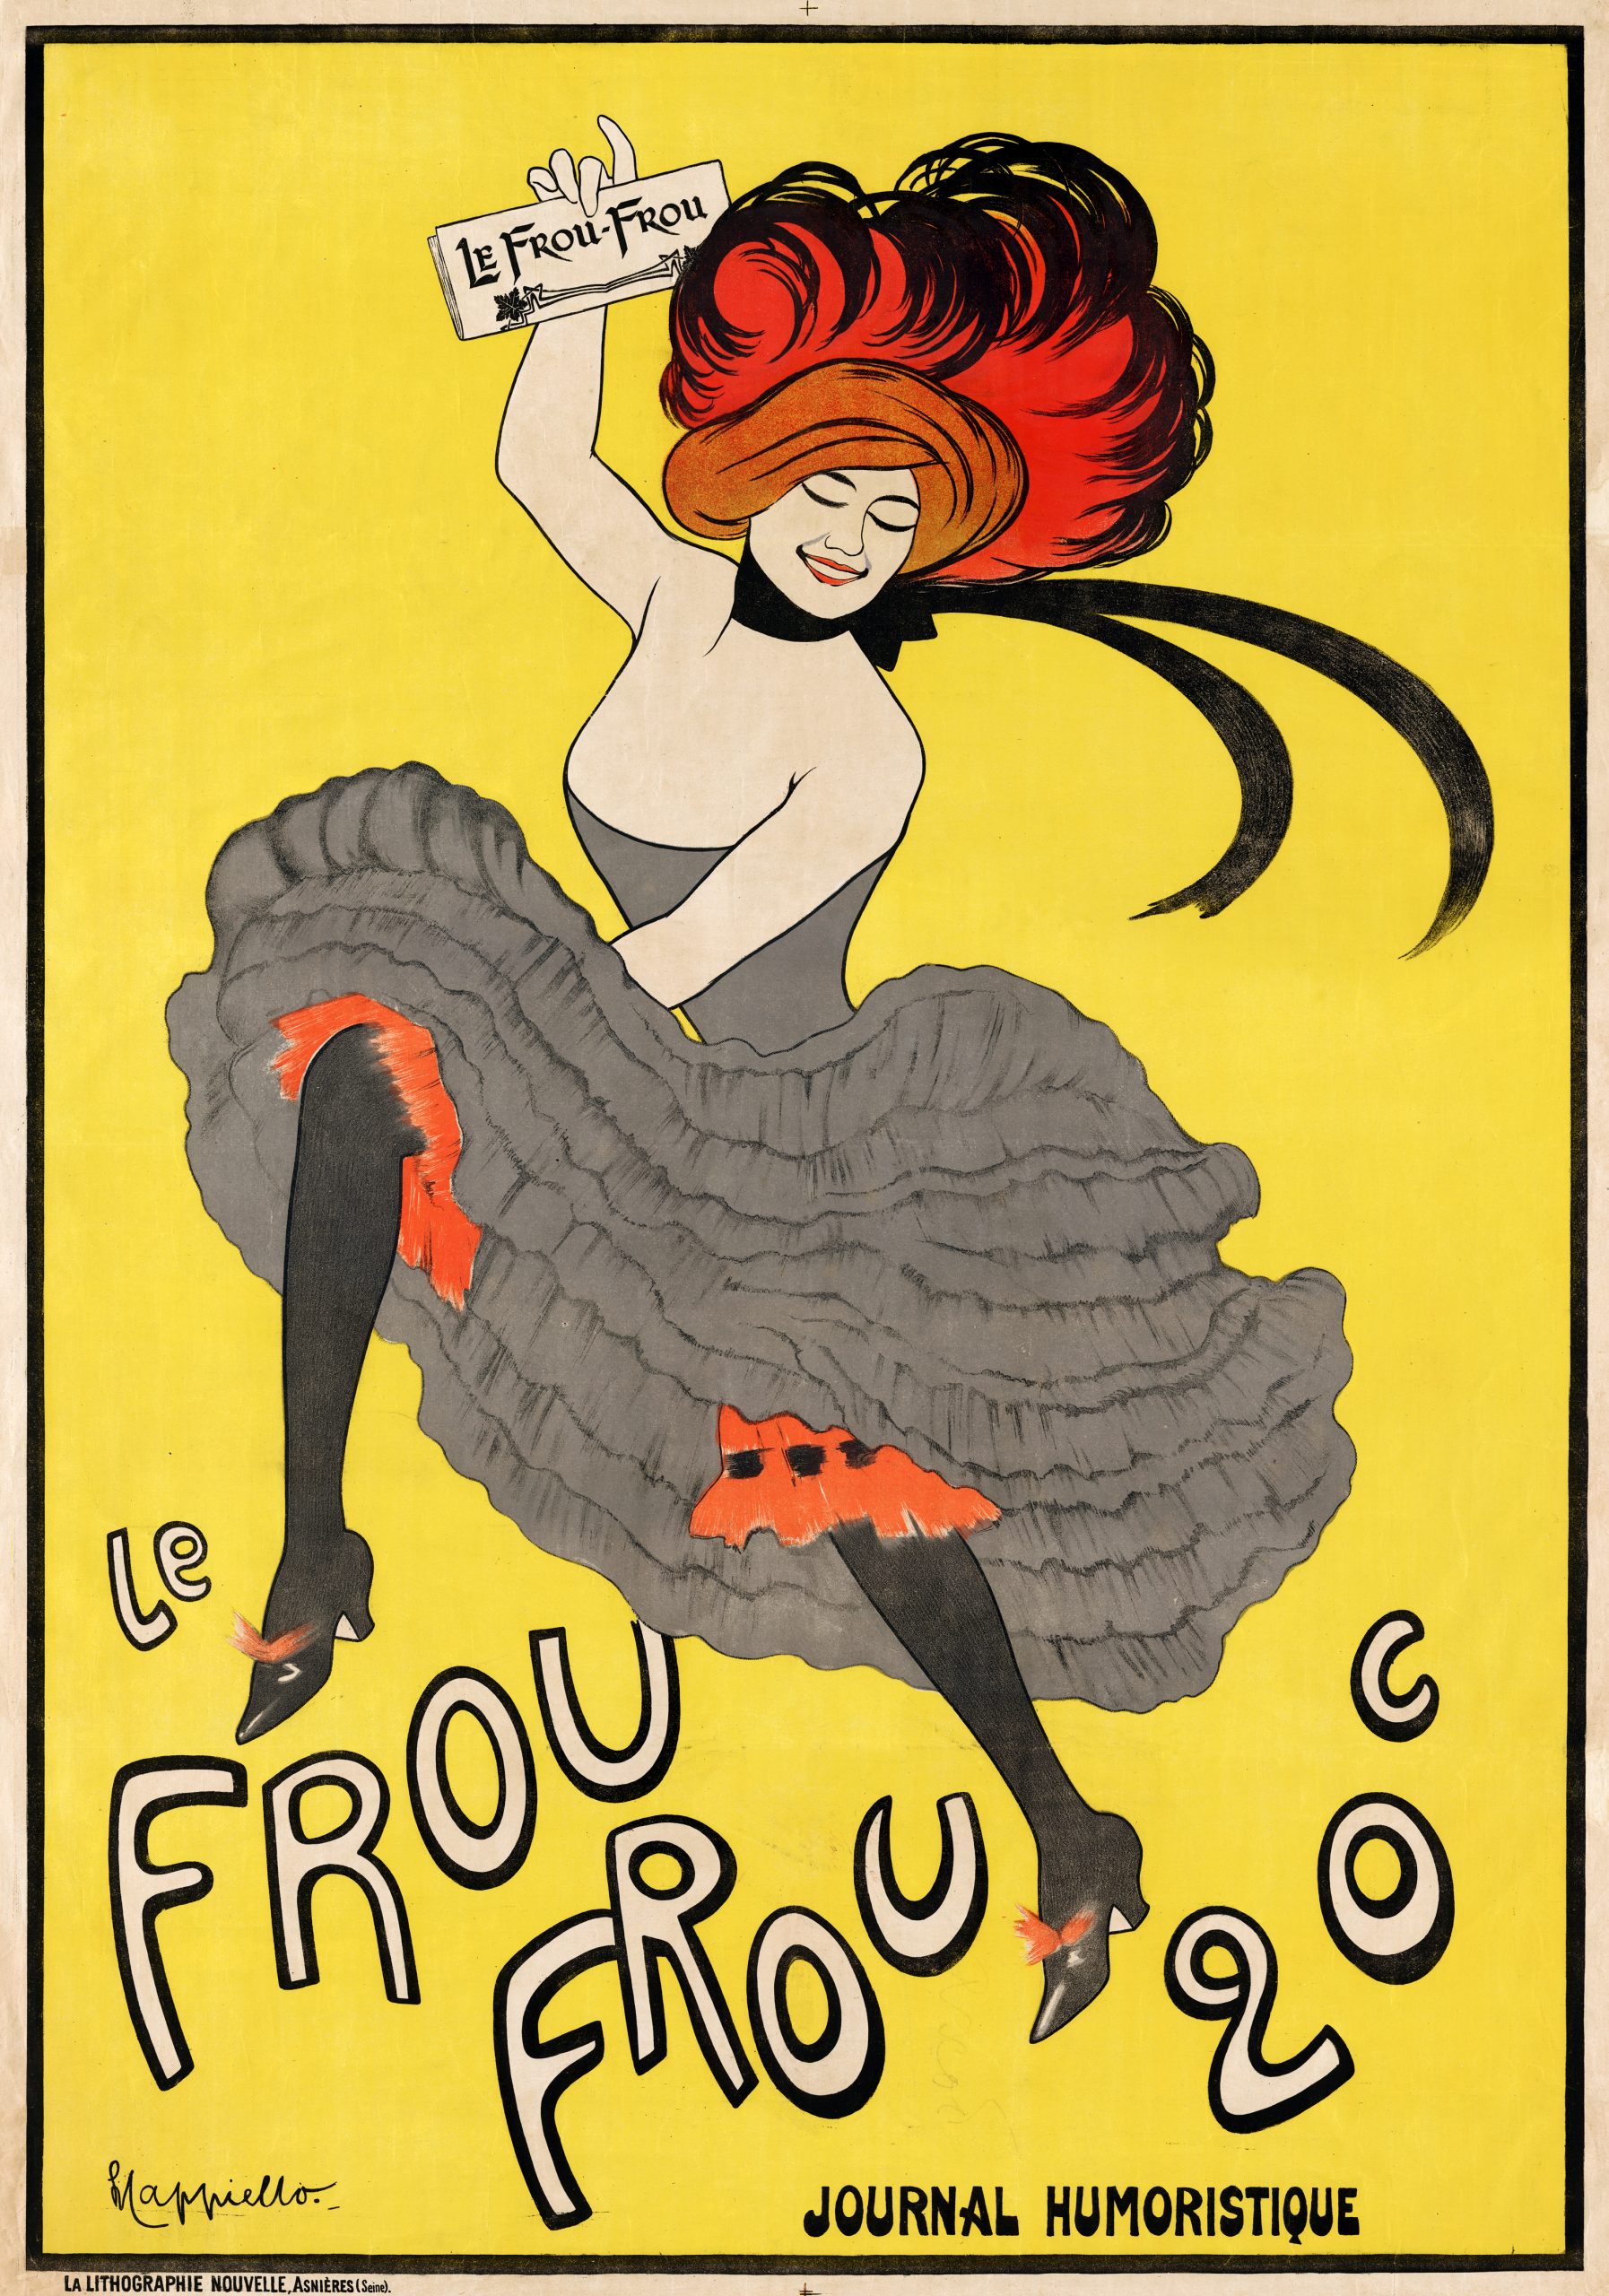 illustrational poster of a woman with red hair in a grey dress dancing against a yellow background